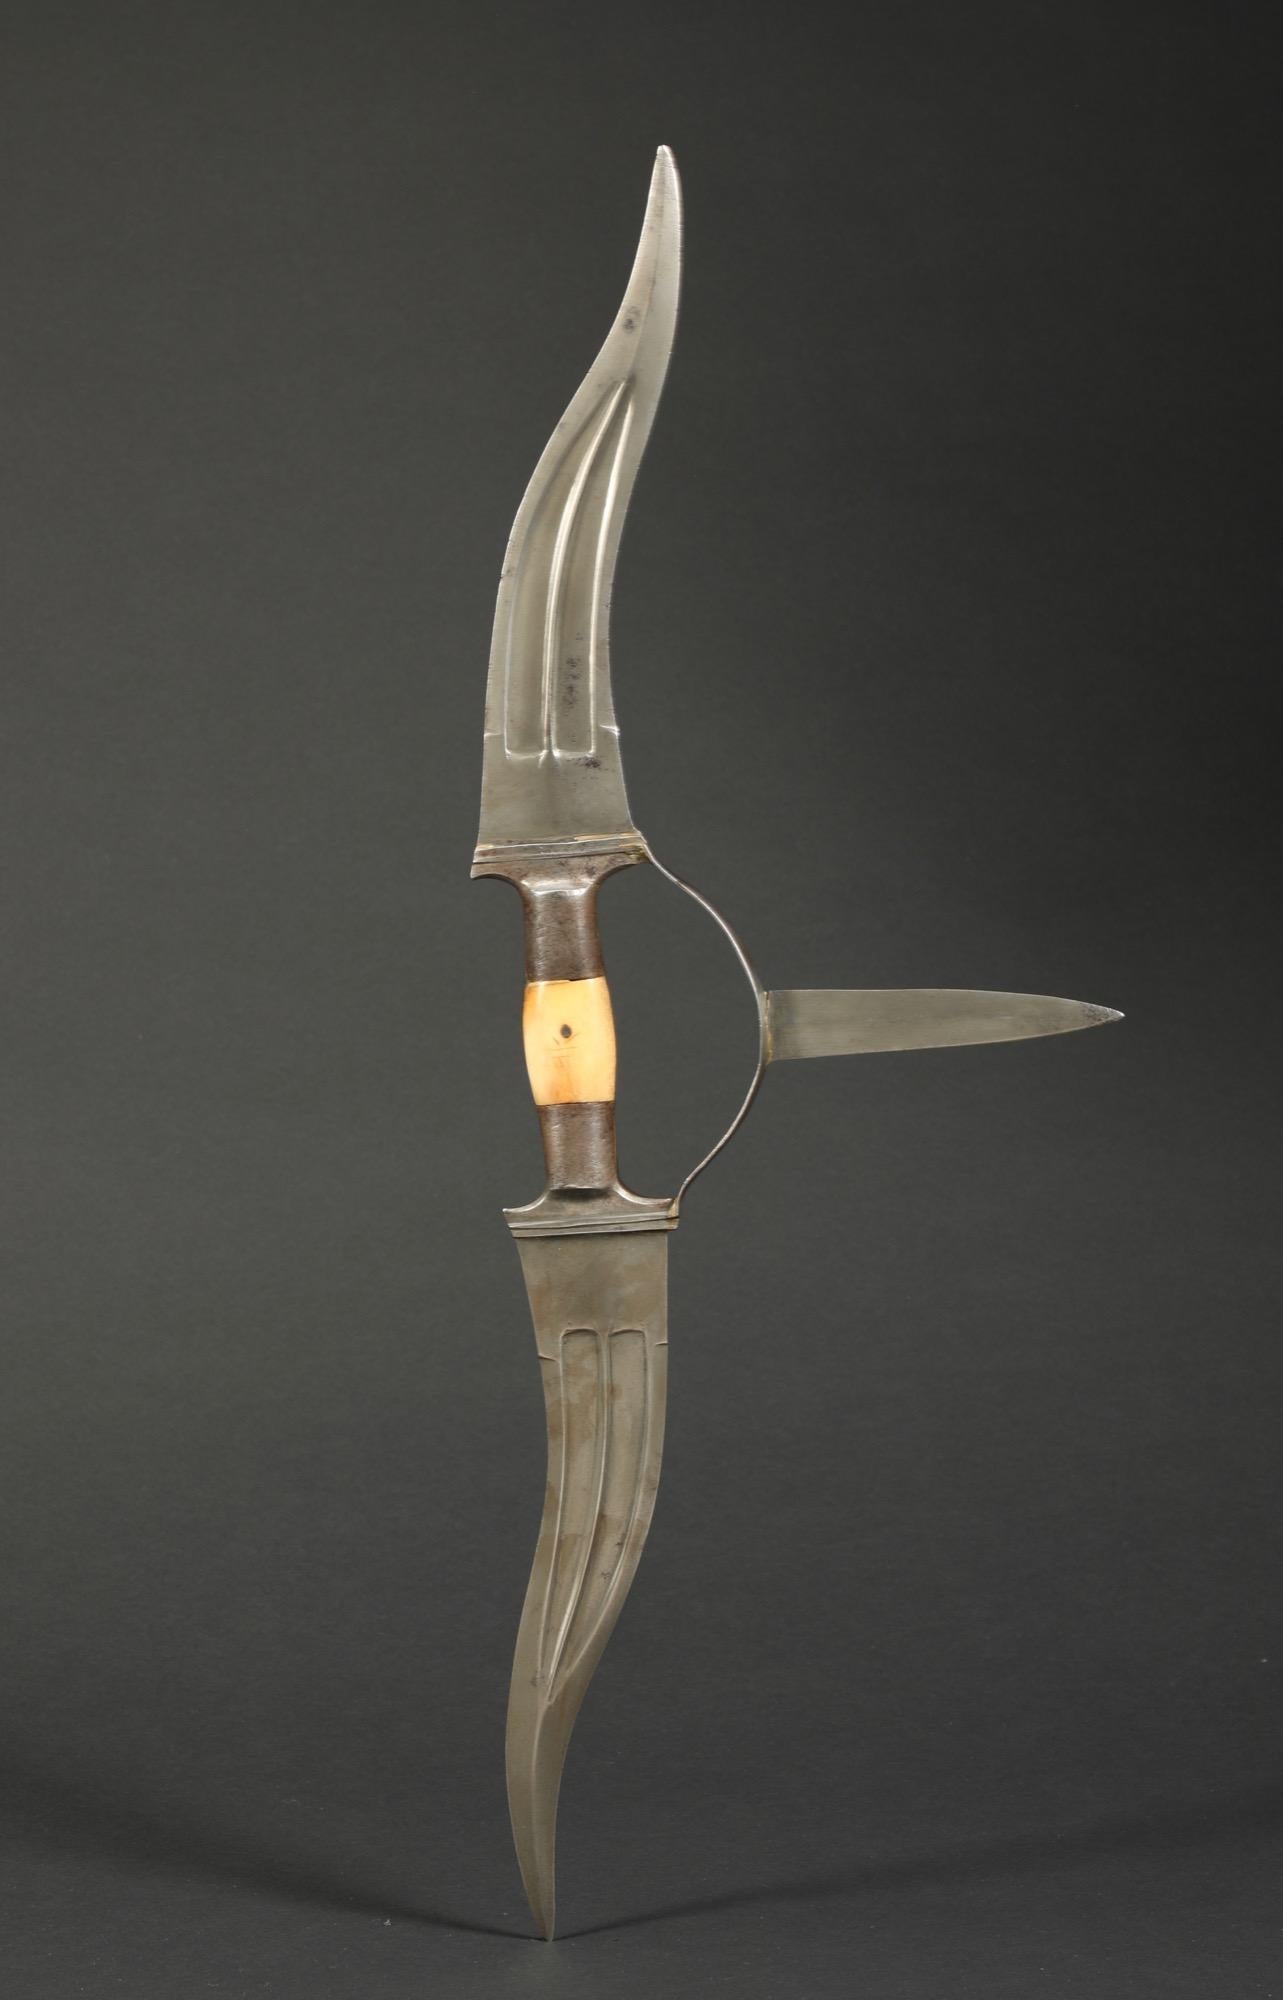 The Haladie dagger is one of the more unusual weapons from India. The two large blades are wellformed with a high center ridge and two fullers. The hand guard has a small double edged blade. The handle has plaques of bone that show a good patina